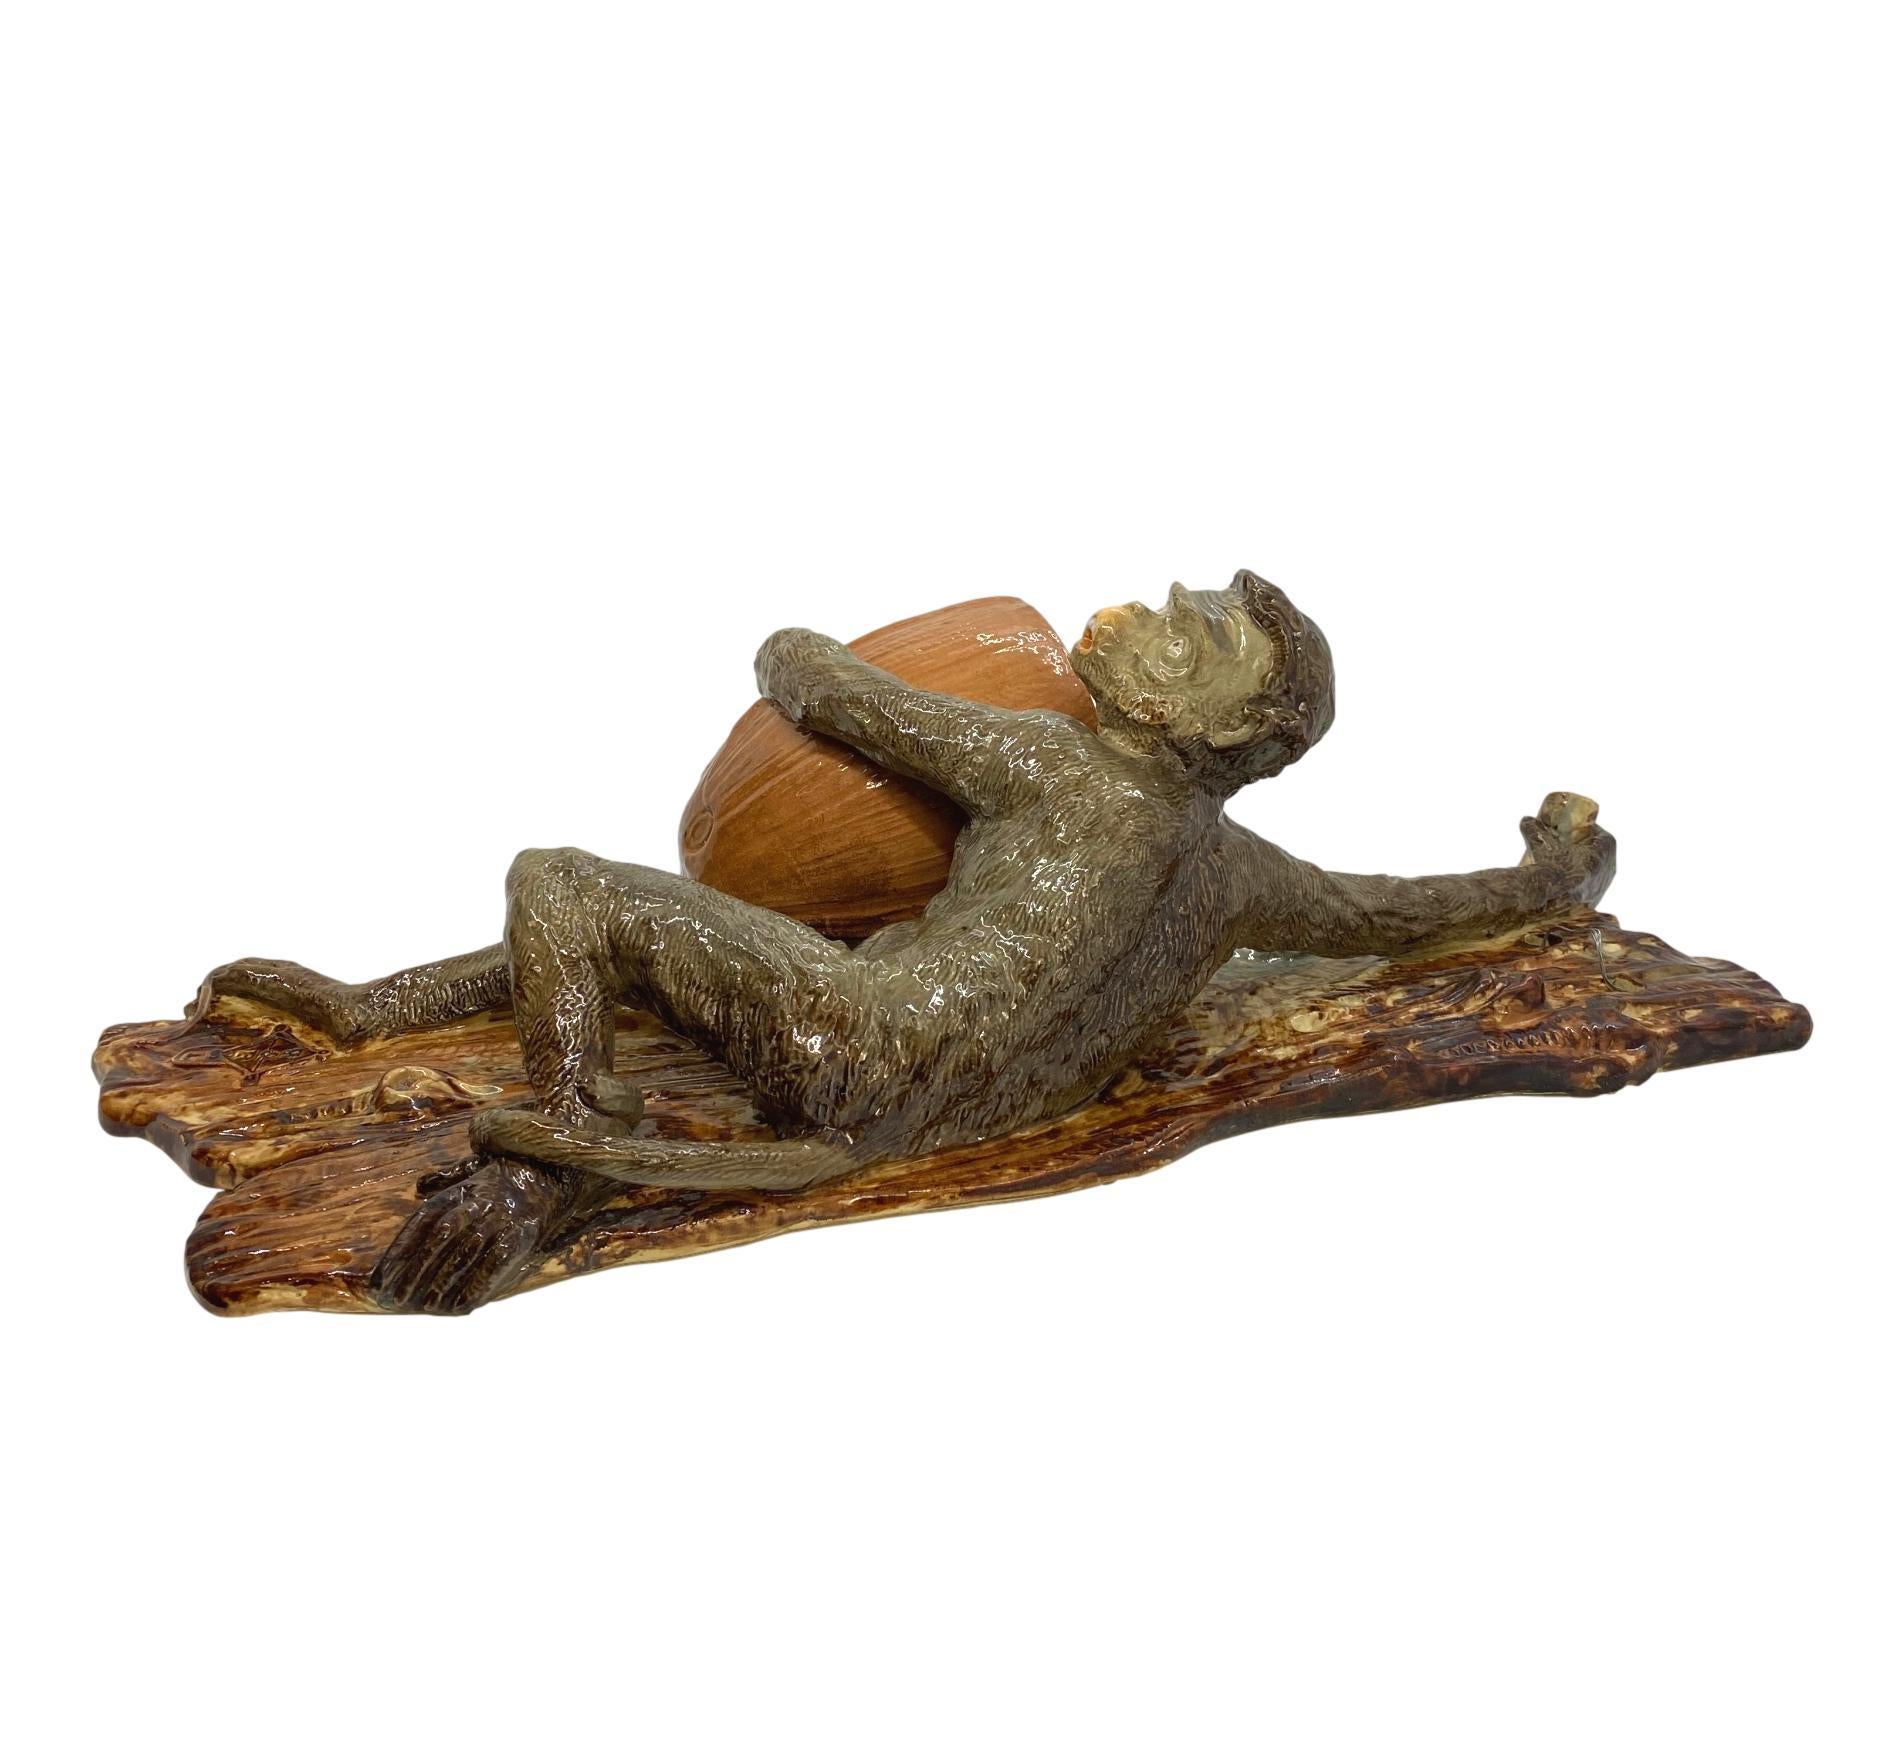 Wayte & Ridge Majolica Monkey wall pocket, 18 inches high, English, ca. 1860, molded as a monkey climbing a tree, holding a simulated coconut forming the flower bowl, with molded lozenge below the monkey's right foot, 'W & R L,' for Wayte & Ridge,